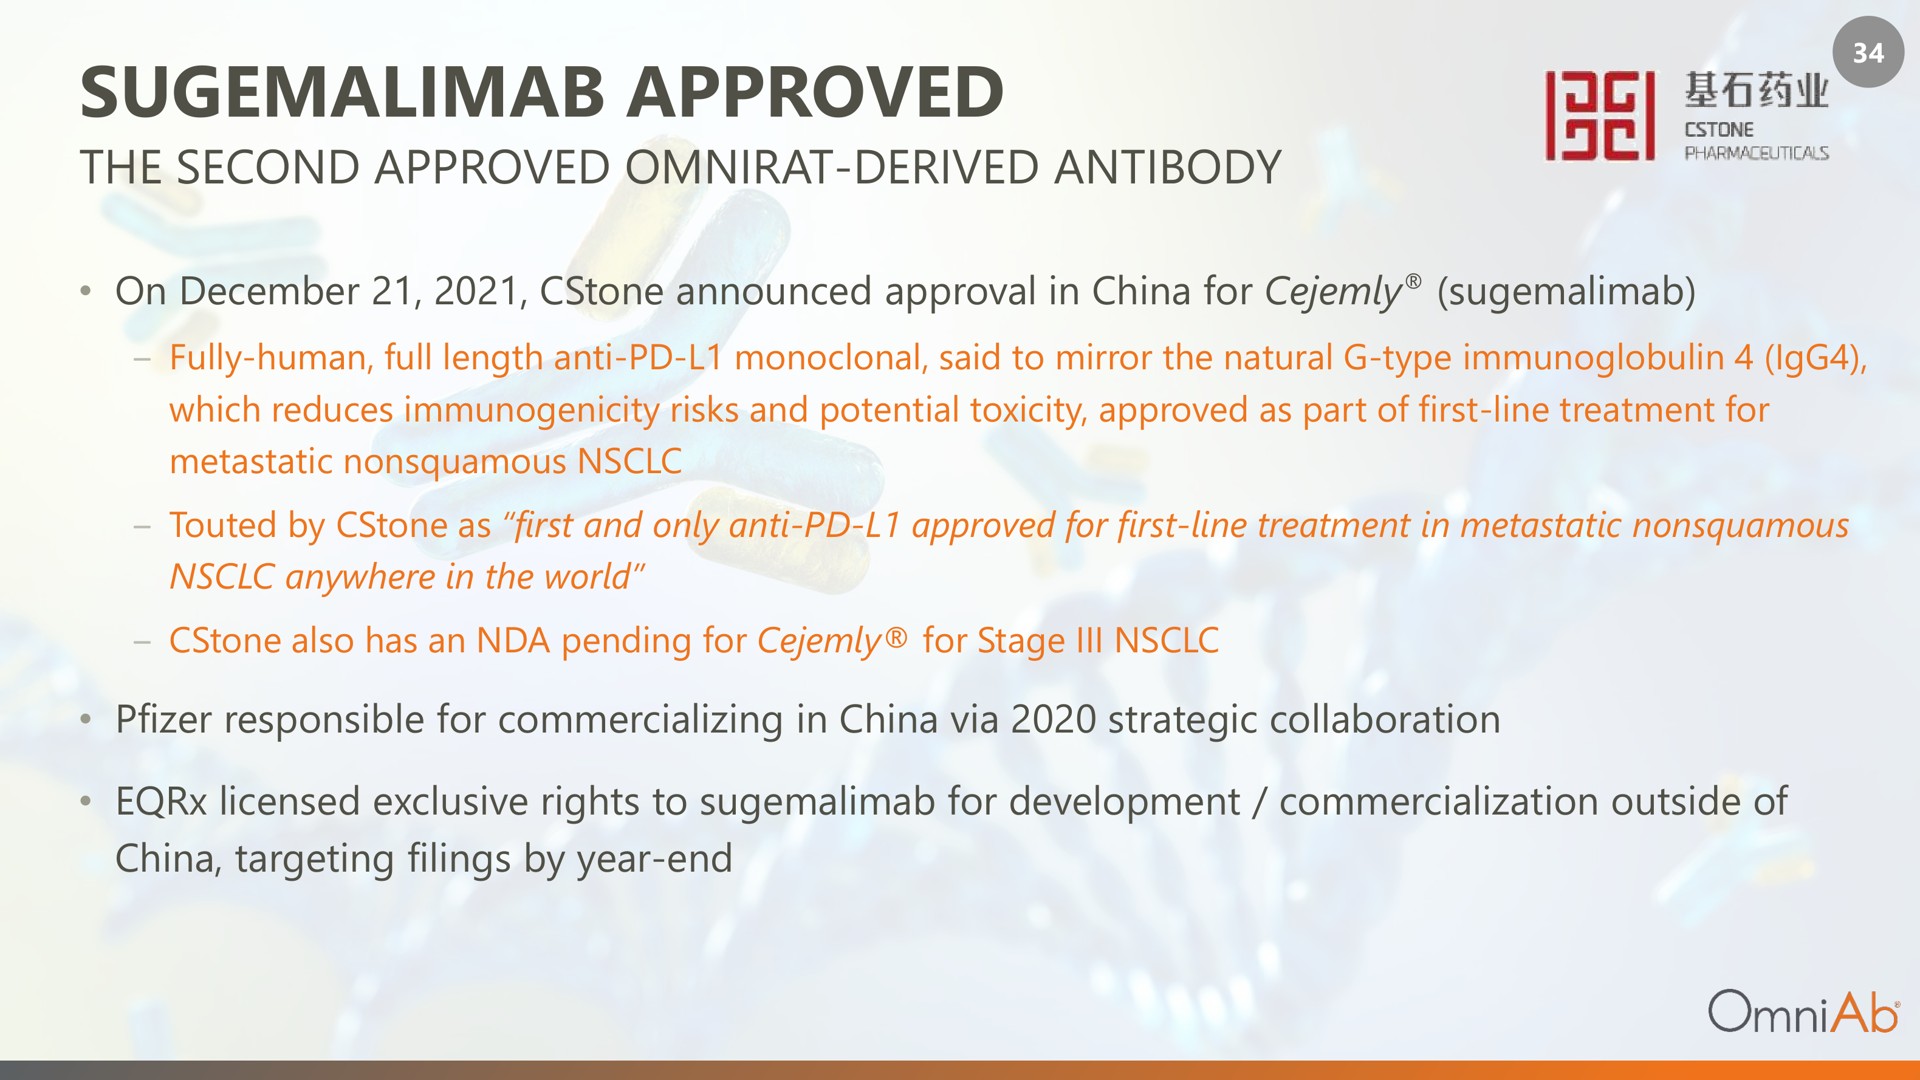 approved the second derived antibody sen ions | OmniAb